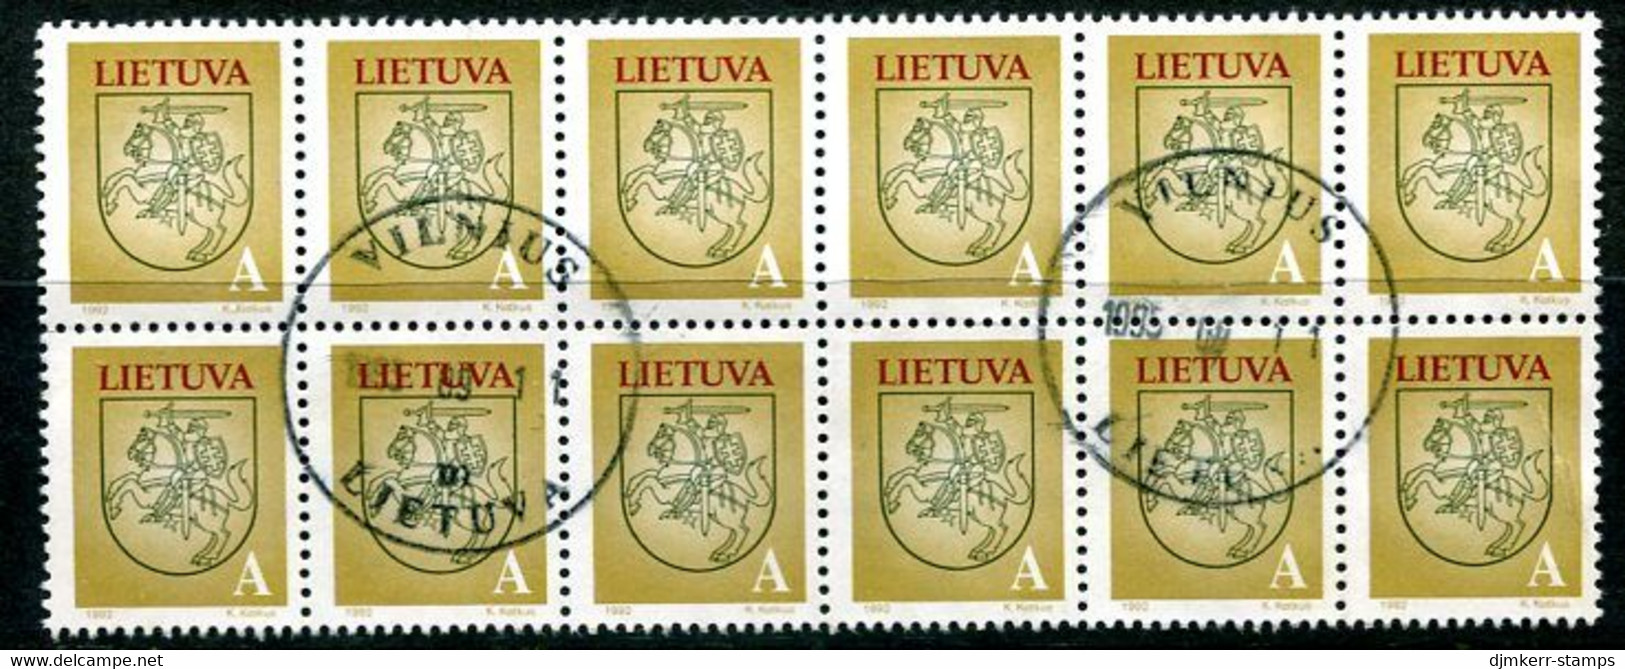 LITHUANIA 1993 Arms Definitive Rate A Block Of 12 Used.  Michel 531 - Lithuania